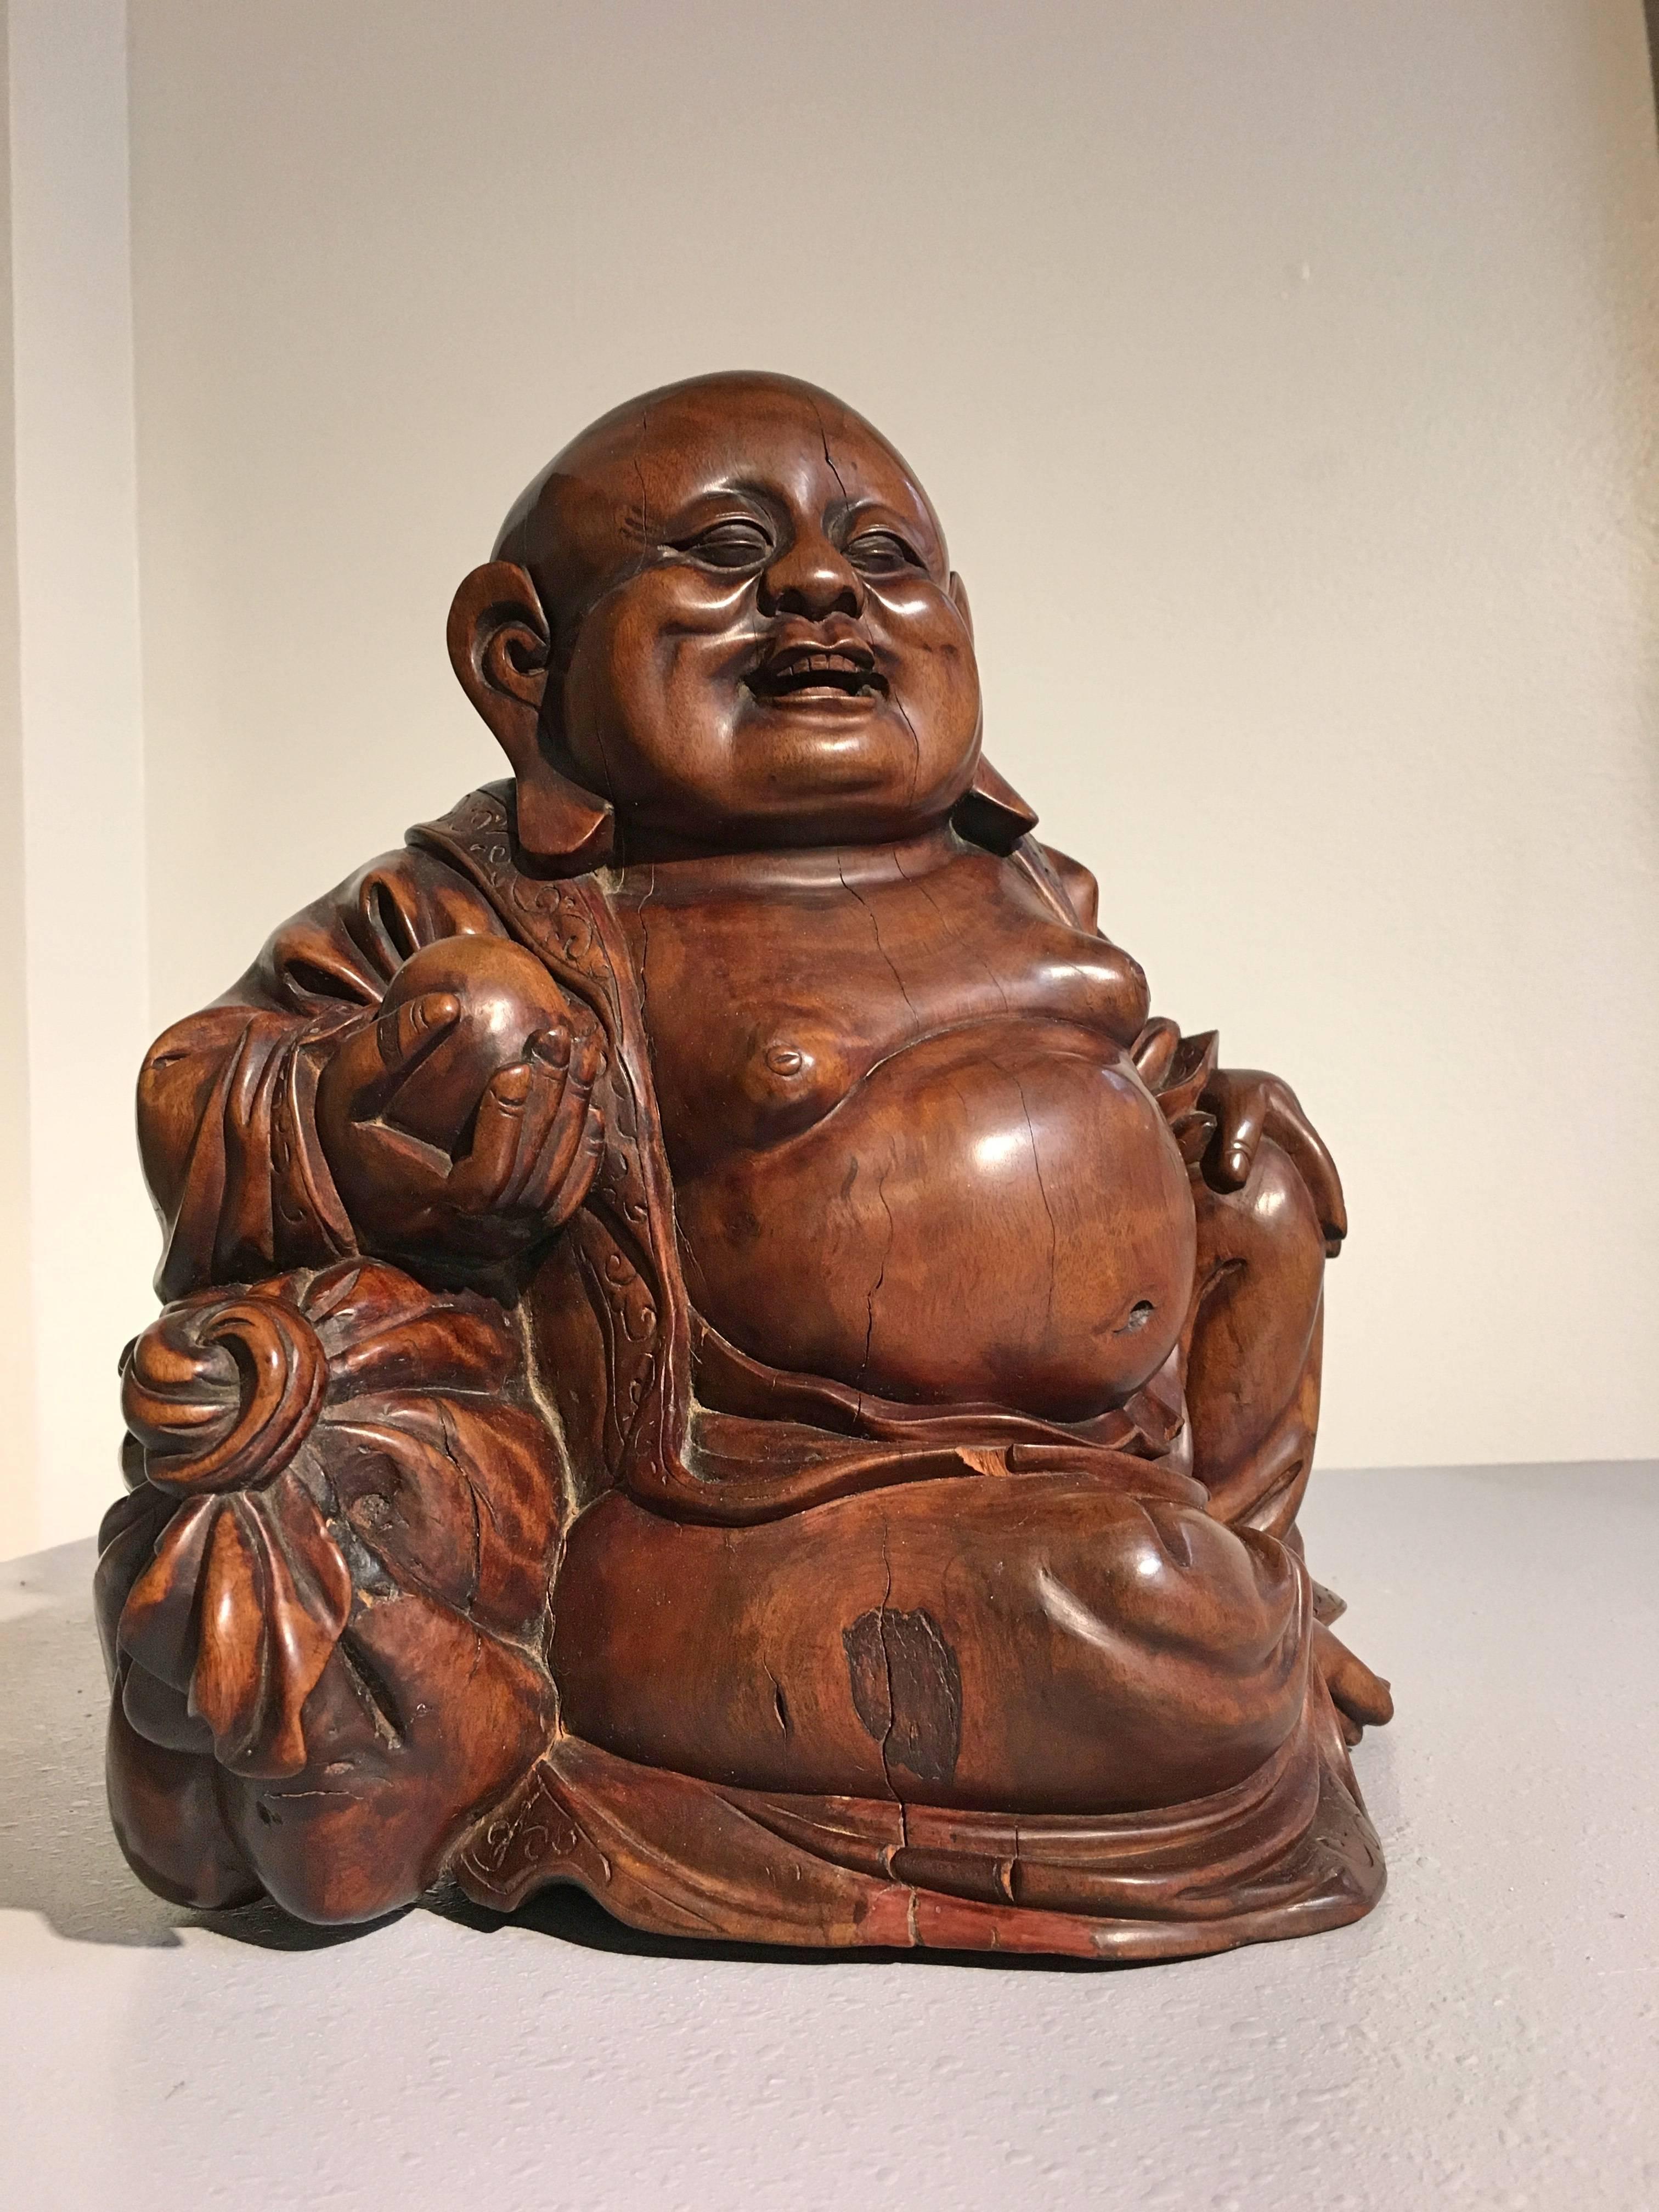 A  well carved hardwood carved figure of Budai, late Qing Dynasty, mid 19th century, China.
Carved from an extremely dense hardwood, with a rich, well figured grain that shimmers in the light. The top of his head displaying a warm and shiny patina